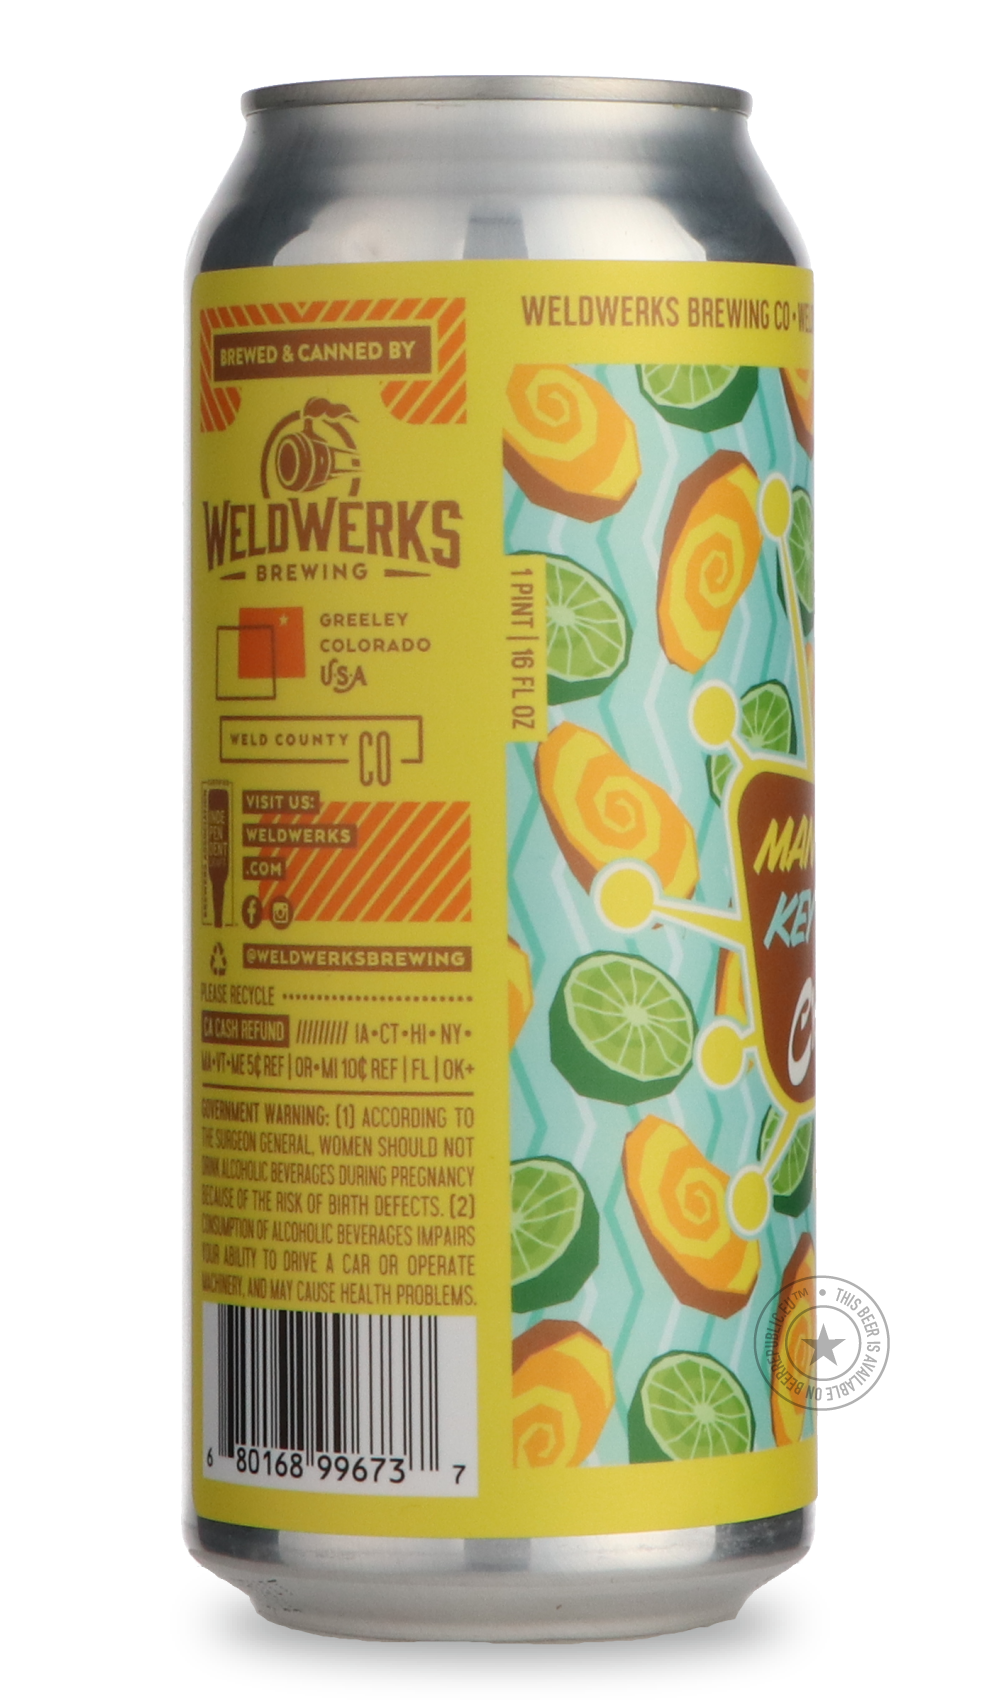 -WeldWerks- Mango Key Lime Cheesecake-Sour / Wild & Fruity- Only @ Beer Republic - The best online beer store for American & Canadian craft beer - Buy beer online from the USA and Canada - Bier online kopen - Amerikaans bier kopen - Craft beer store - Craft beer kopen - Amerikanisch bier kaufen - Bier online kaufen - Acheter biere online - IPA - Stout - Porter - New England IPA - Hazy IPA - Imperial Stout - Barrel Aged - Barrel Aged Imperial Stout - Brown - Dark beer - Blond - Blonde - Pilsner - Lager - Whe